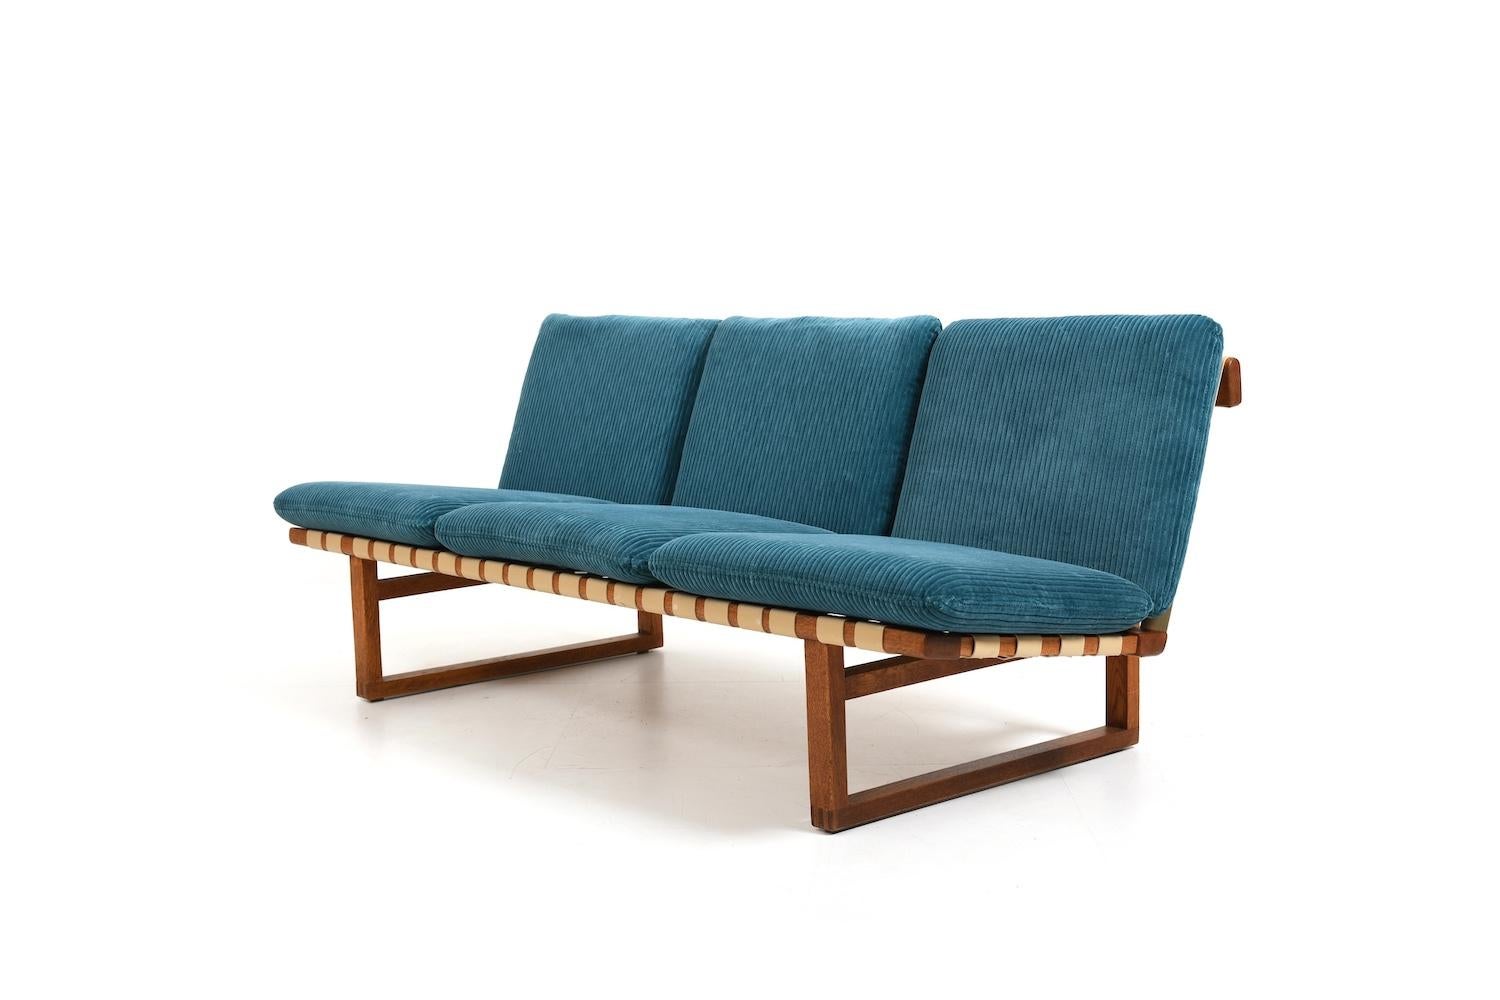 Sofa, model 211 by Børge Mogensen for Fredericia Stolefabrik 1956. Early production 1950s. Made in solid oak. We cleaned the sofa to preserve its old patina and got new straps, new cushions and a new petrol-colored velor fabric.